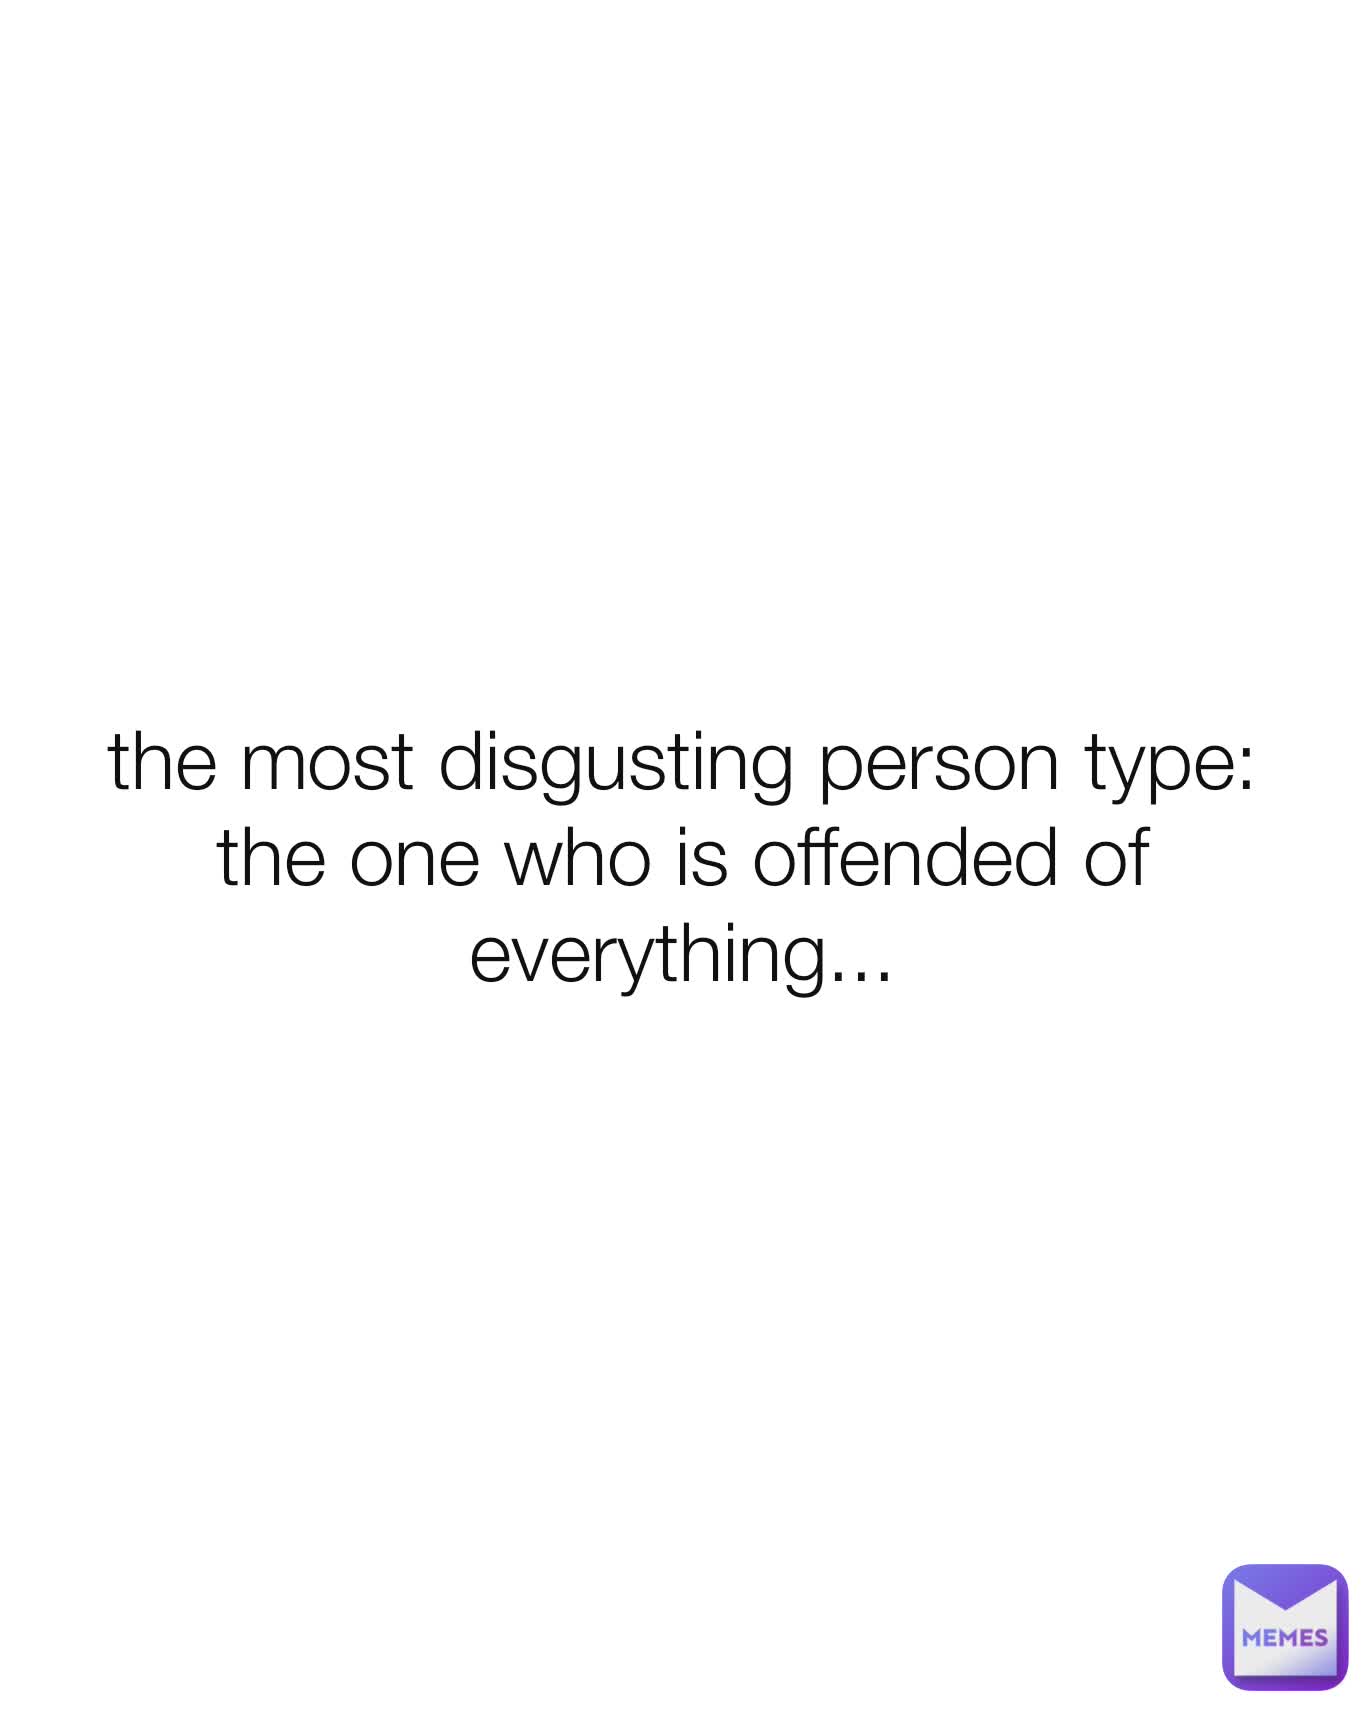 the most disgusting person type:
the one who is offended of everything...